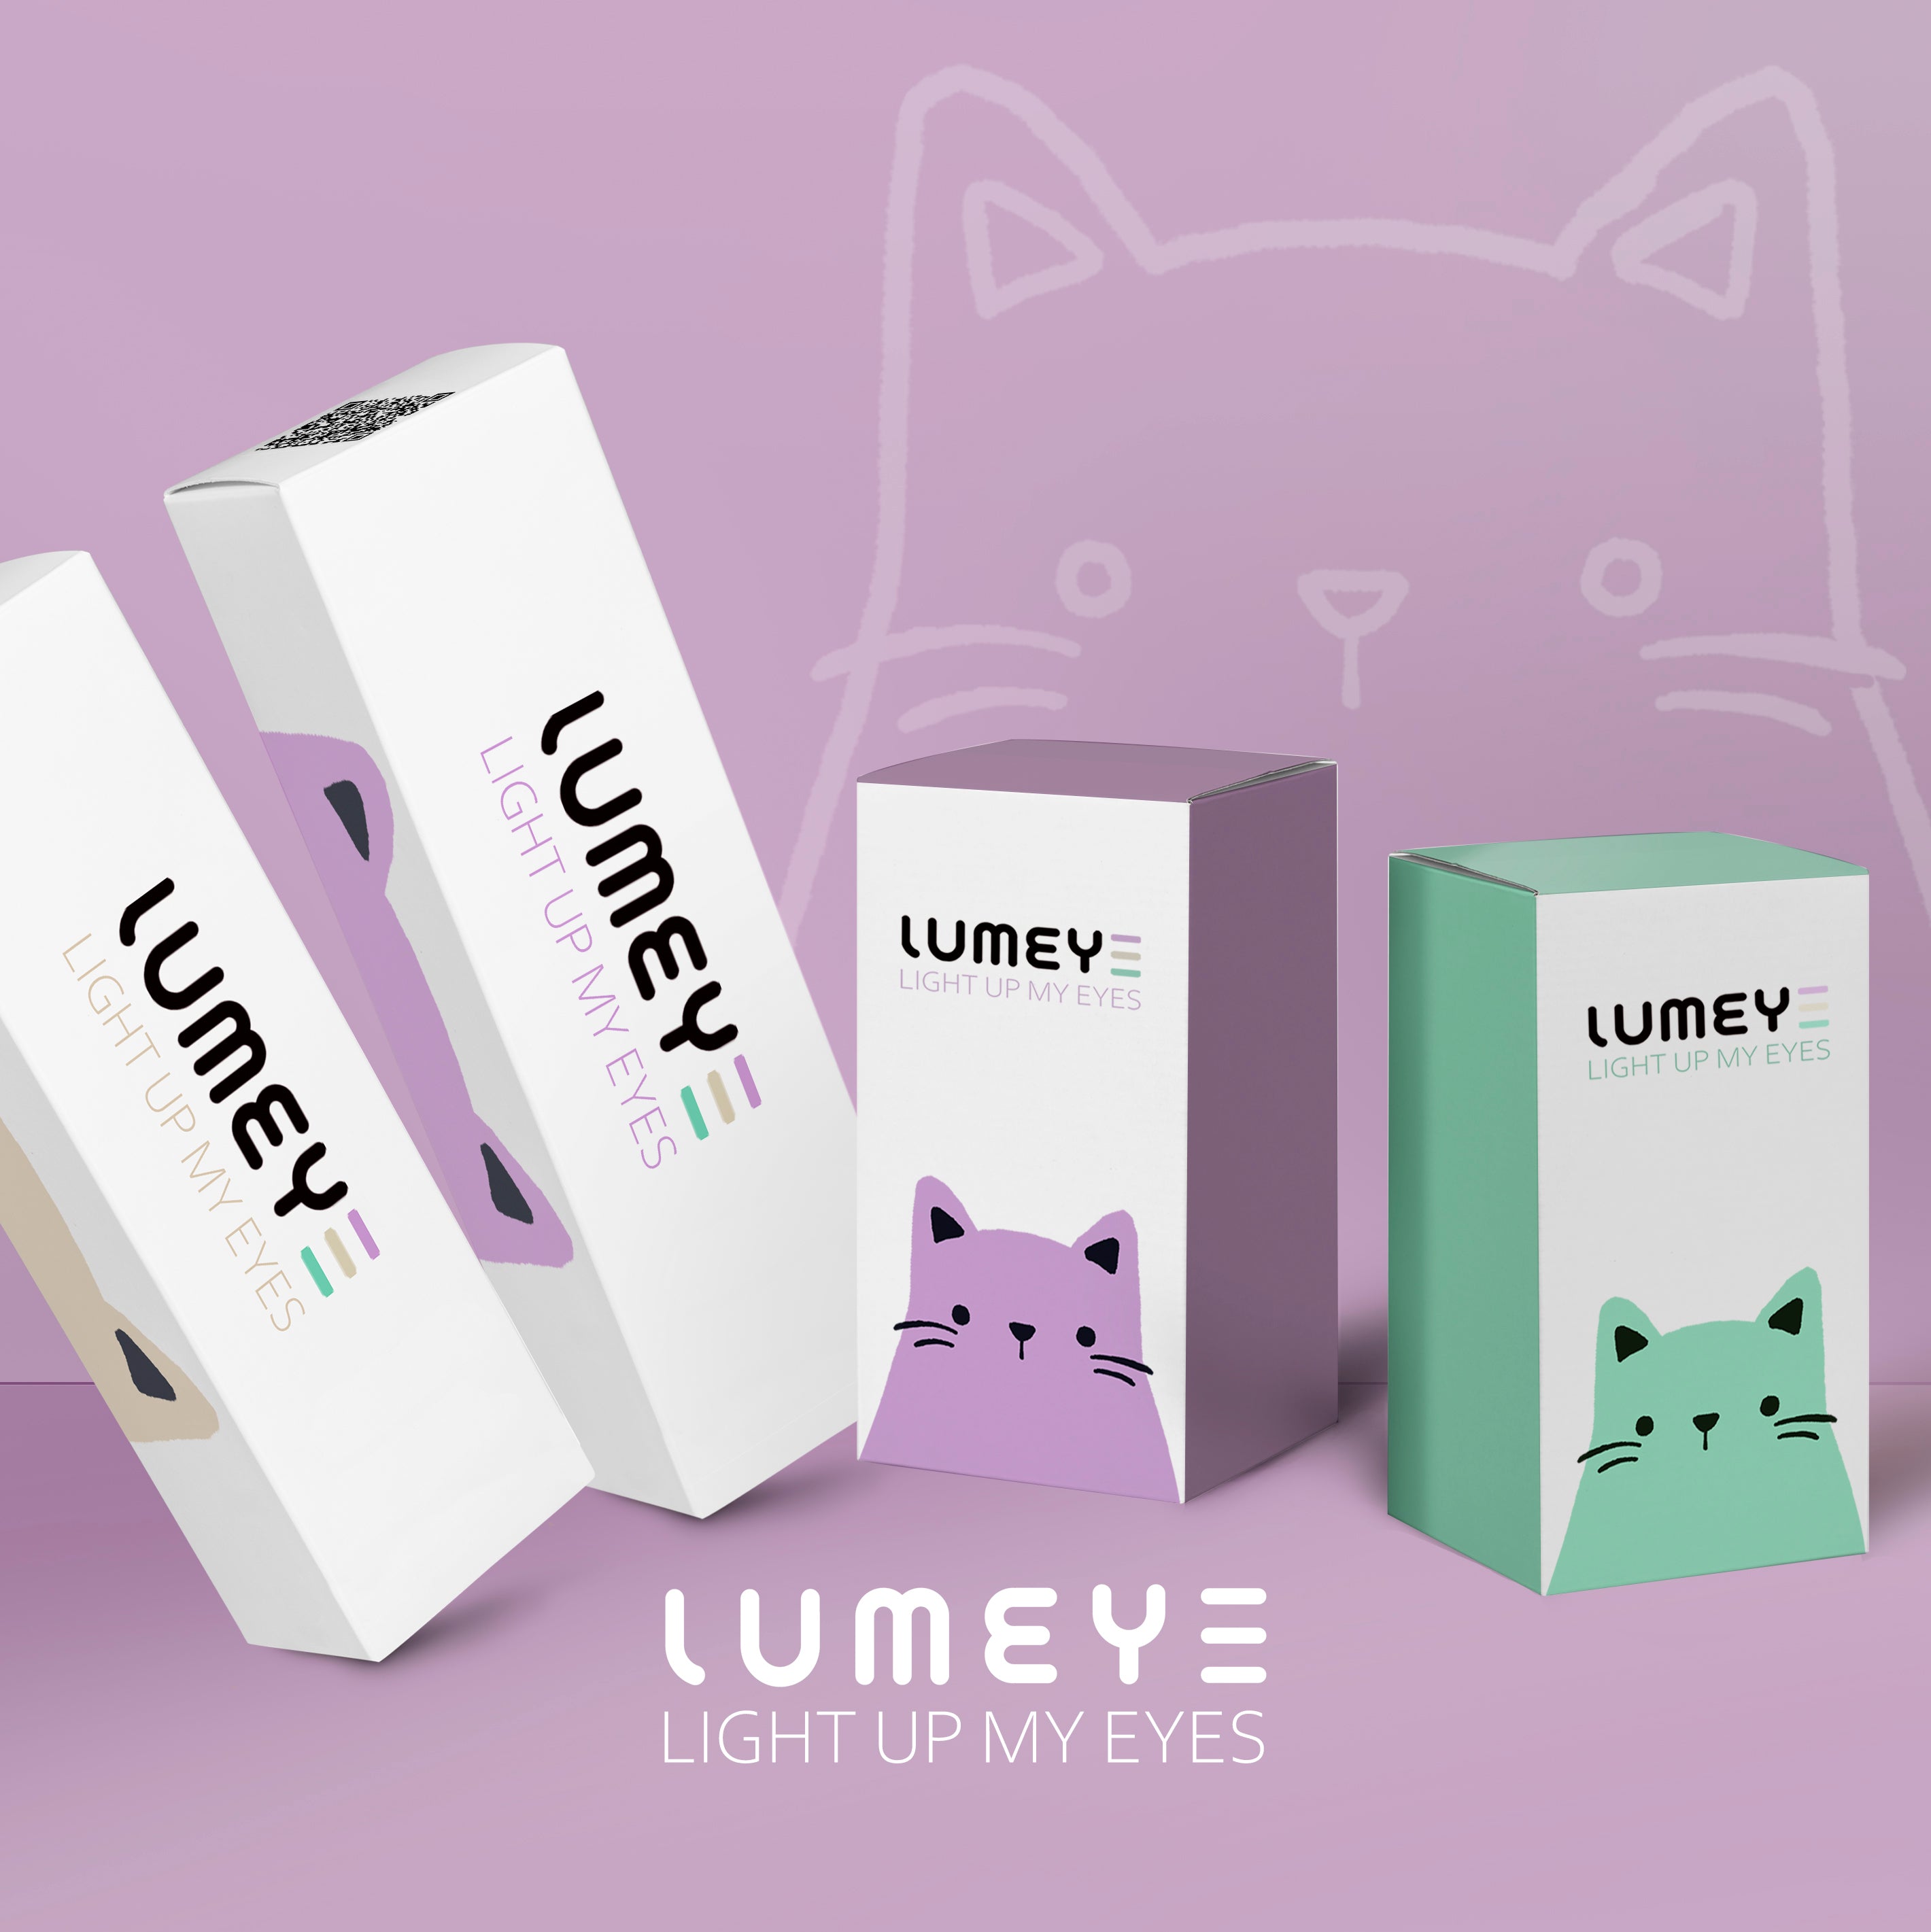 Best COLORED CONTACTS - LUMEYE Gridding White Colored Contact Lenses - LUMEYE